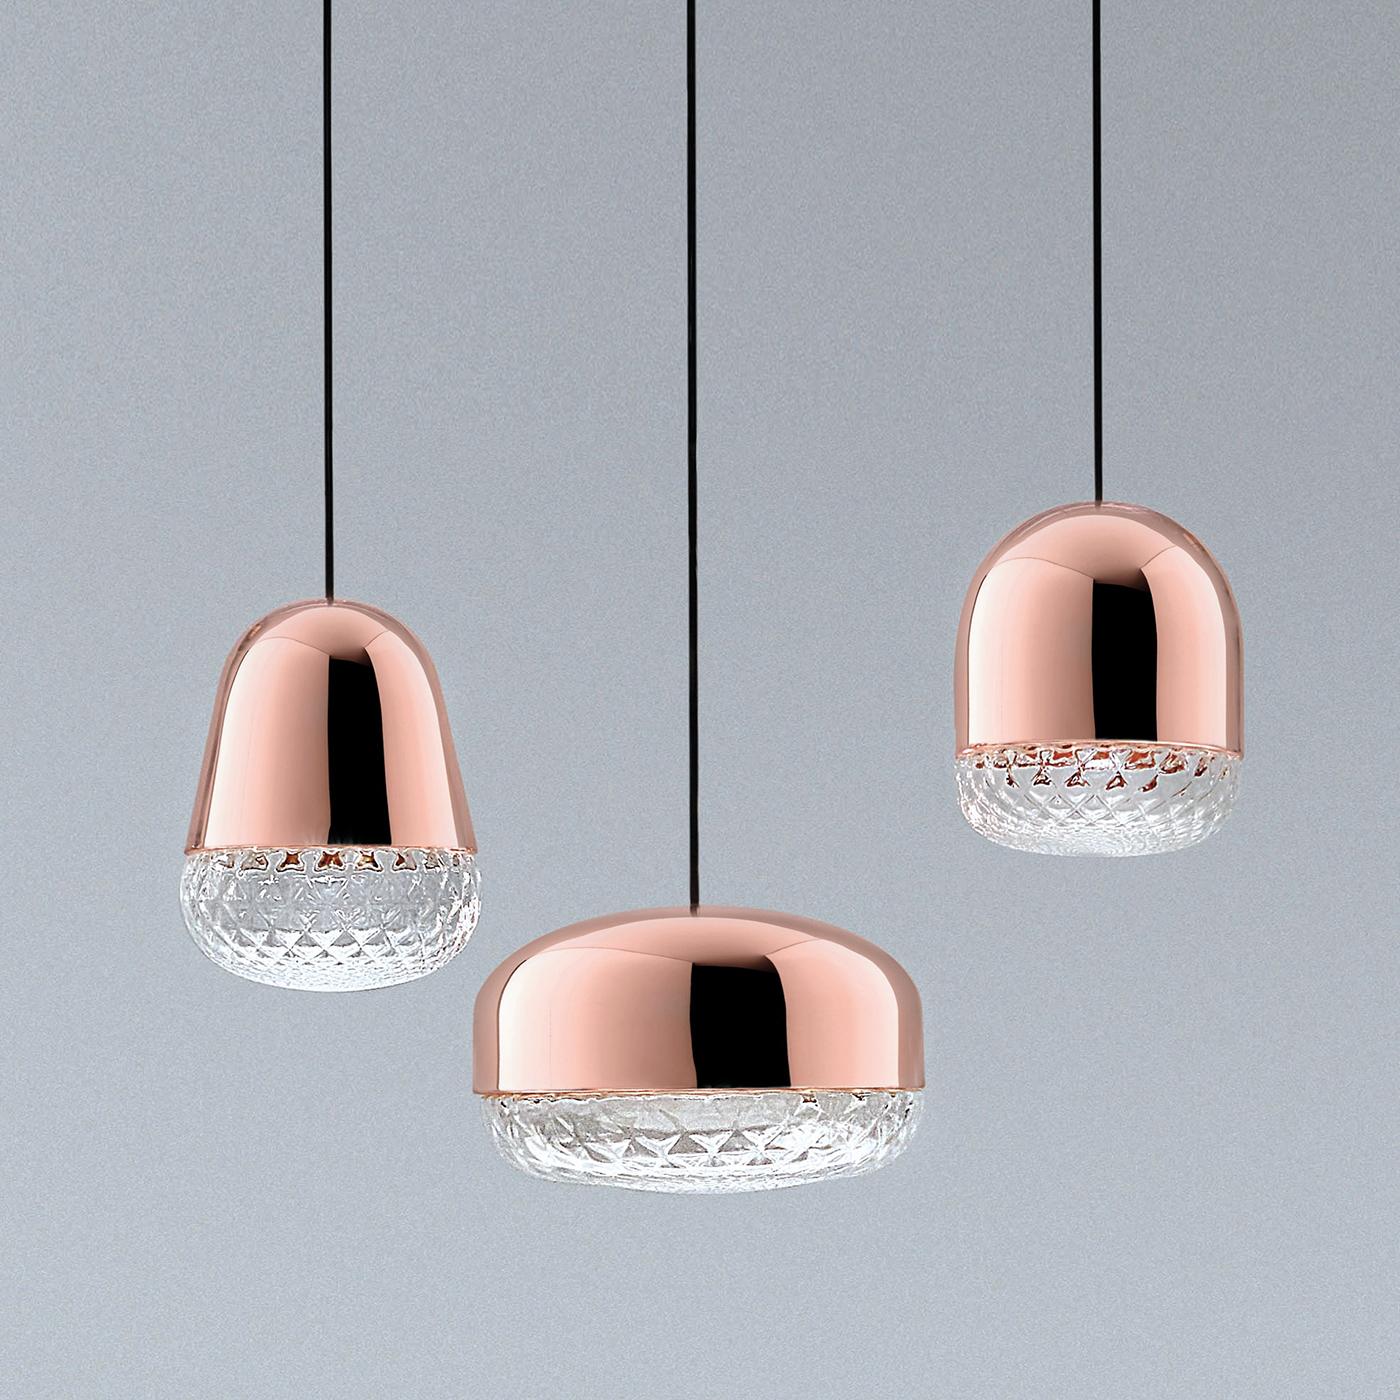 Suggestively shaped like an acorn, this refined pendant by Matteo Zorzenoni features an elegant metal structure with a glossy copper finish complimented by a mouth-blown glass lampshade, which is crafted respecting the original Venetian technique. A